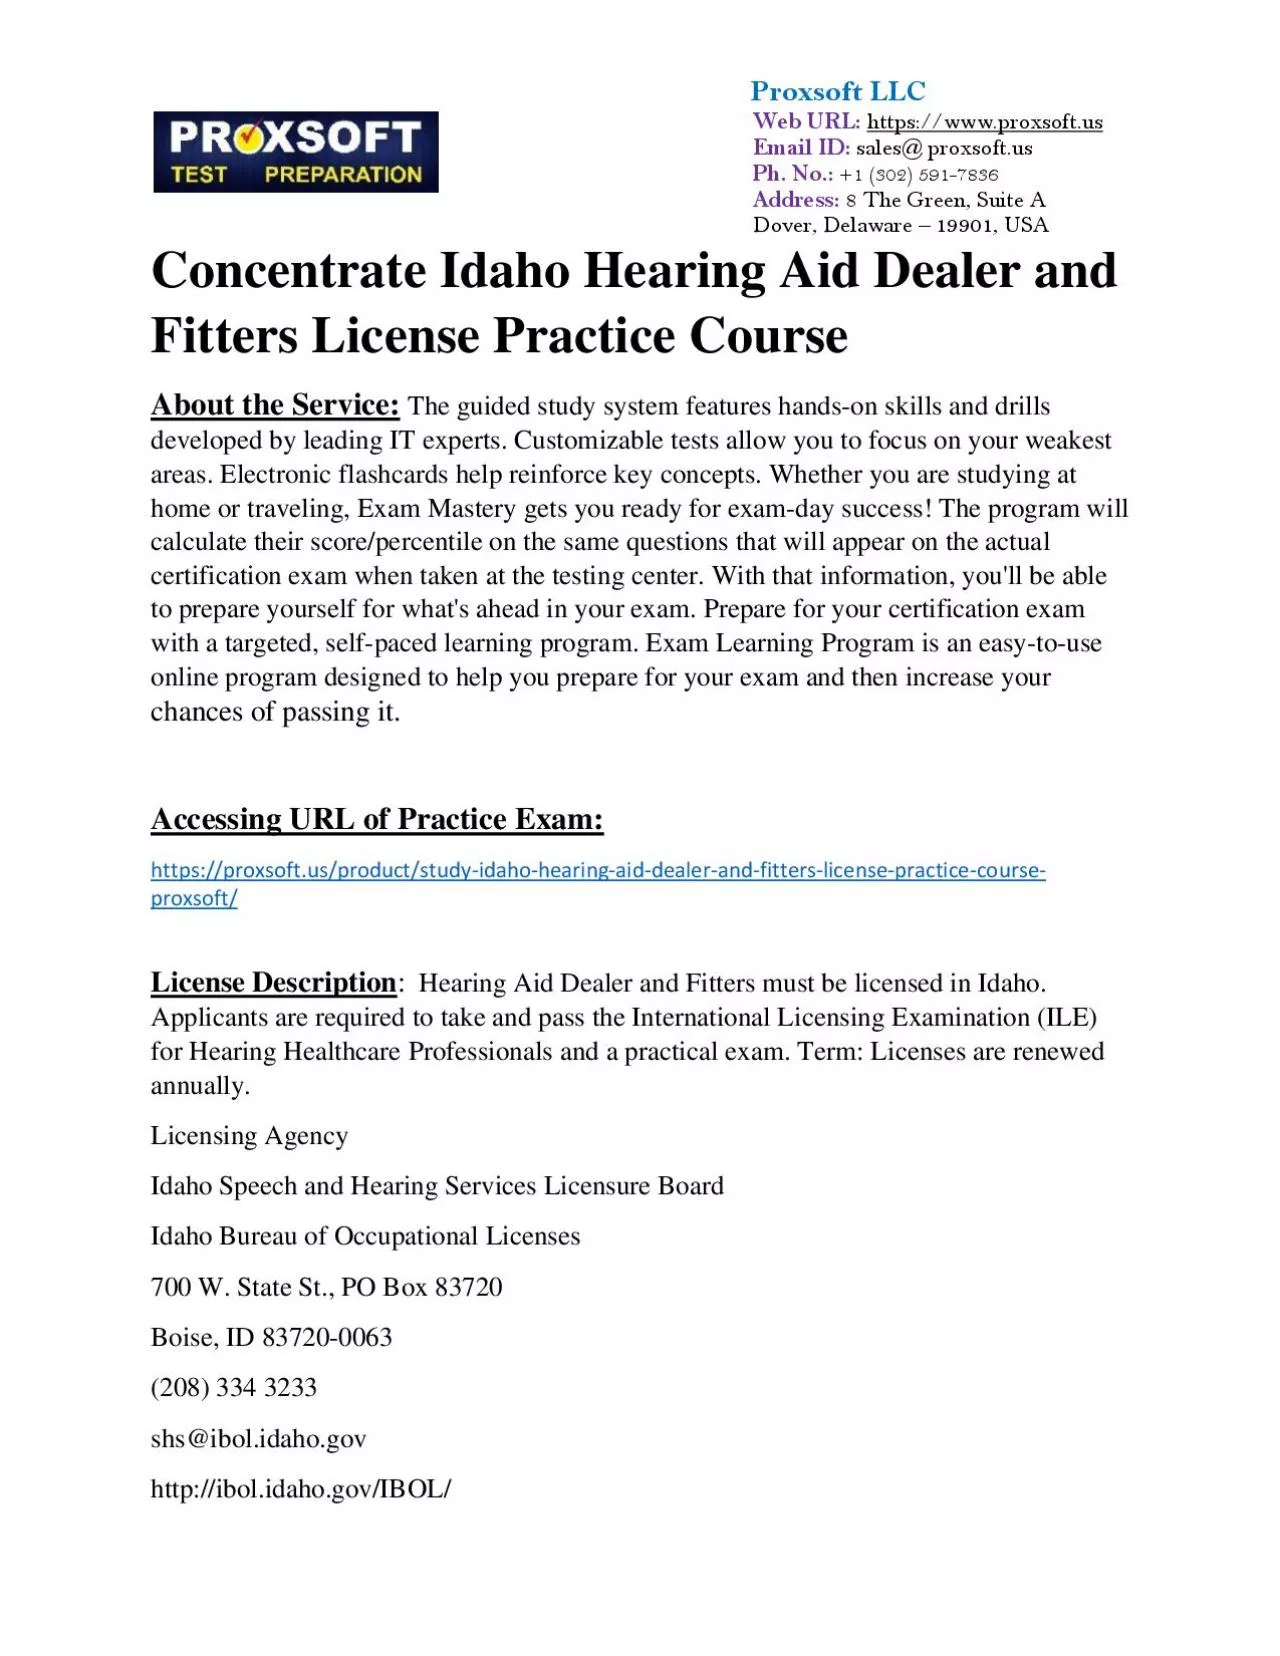 Concentrate Idaho Hearing Aid Dealer and Fitters License Practice Course